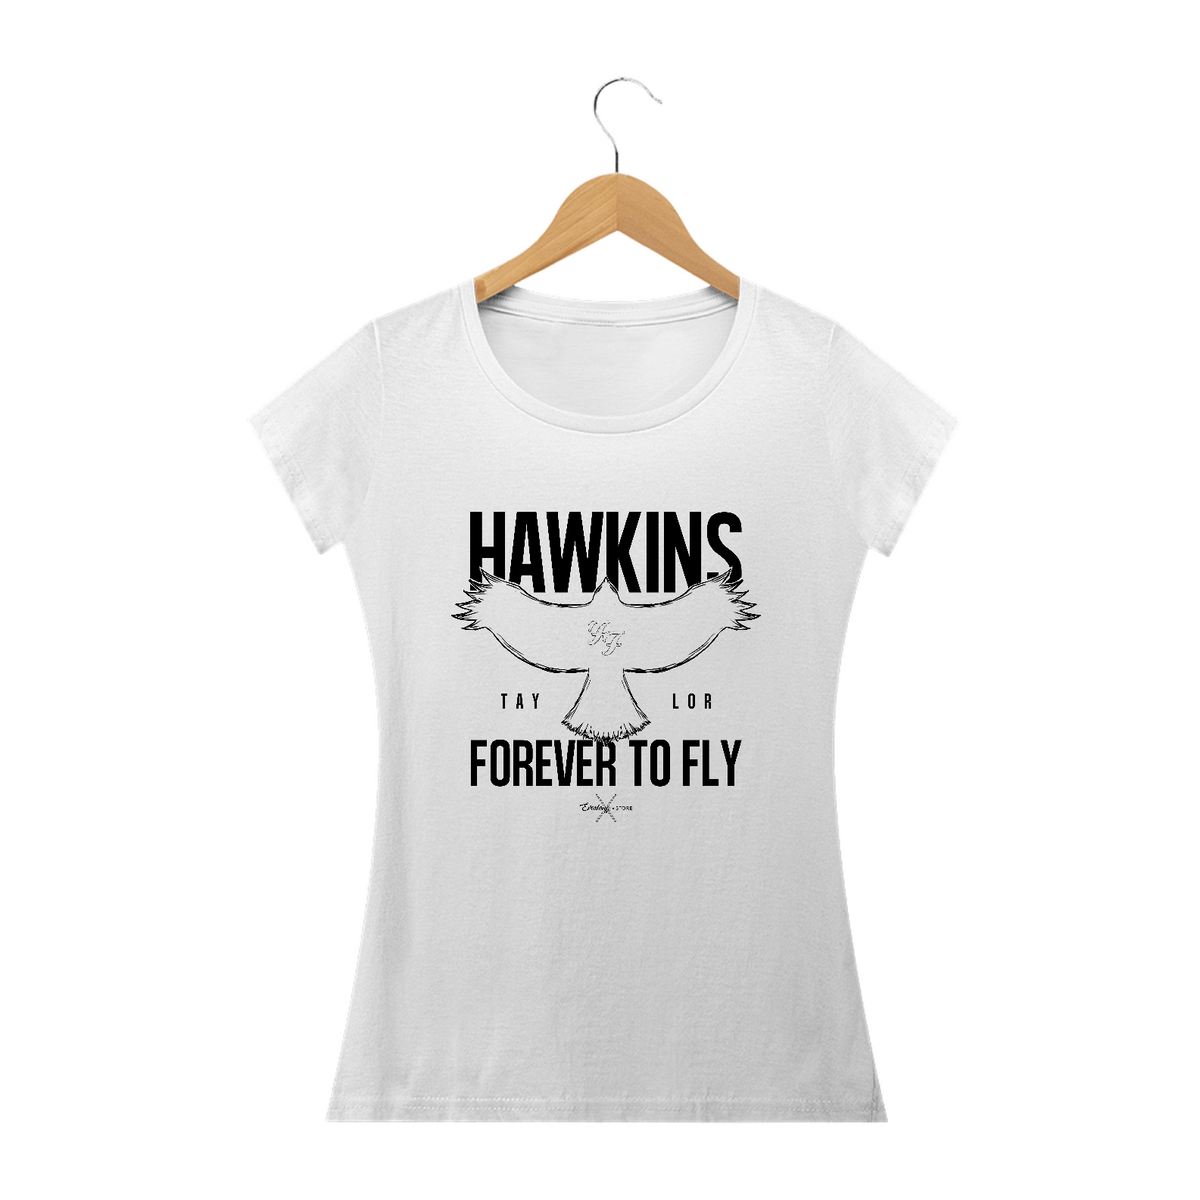 Nome do produto: Camiseta Baby Long - Hawkins Forever to Fly